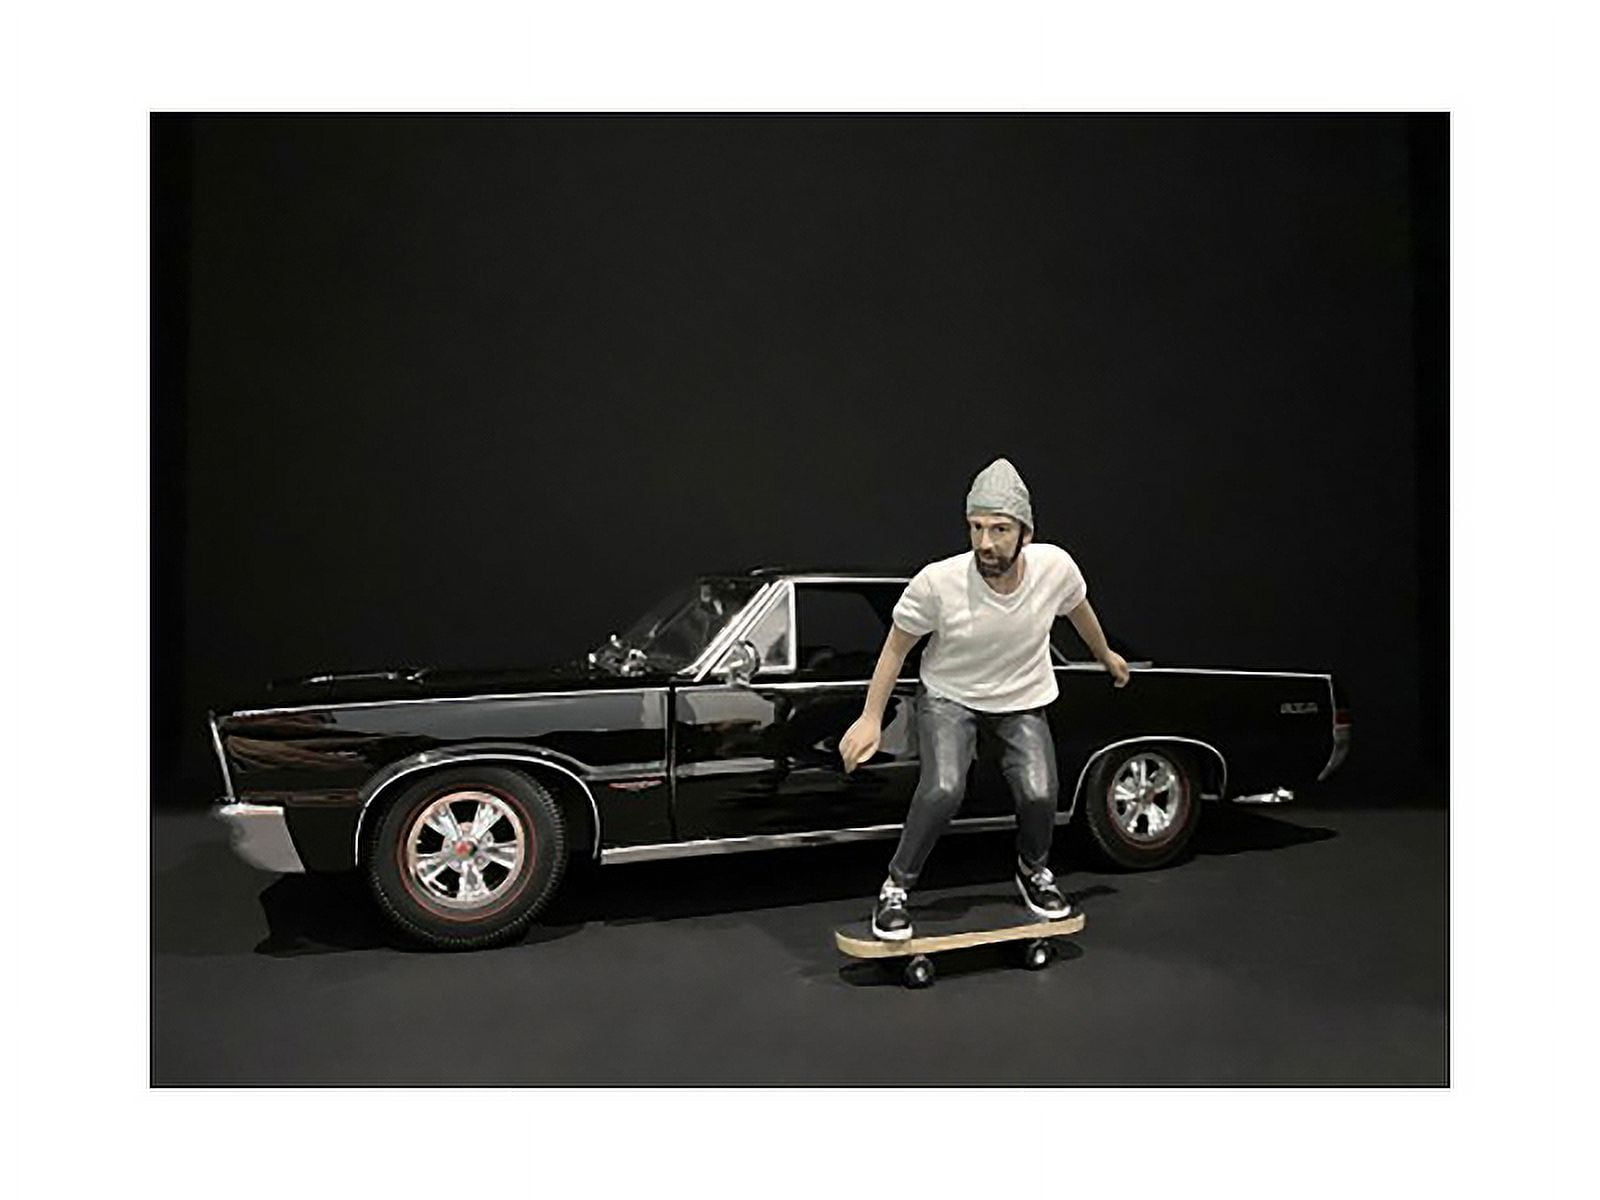 Picture of American Diorama 38341 Skateboarder Figurine II for 1 by 24 Scale Models